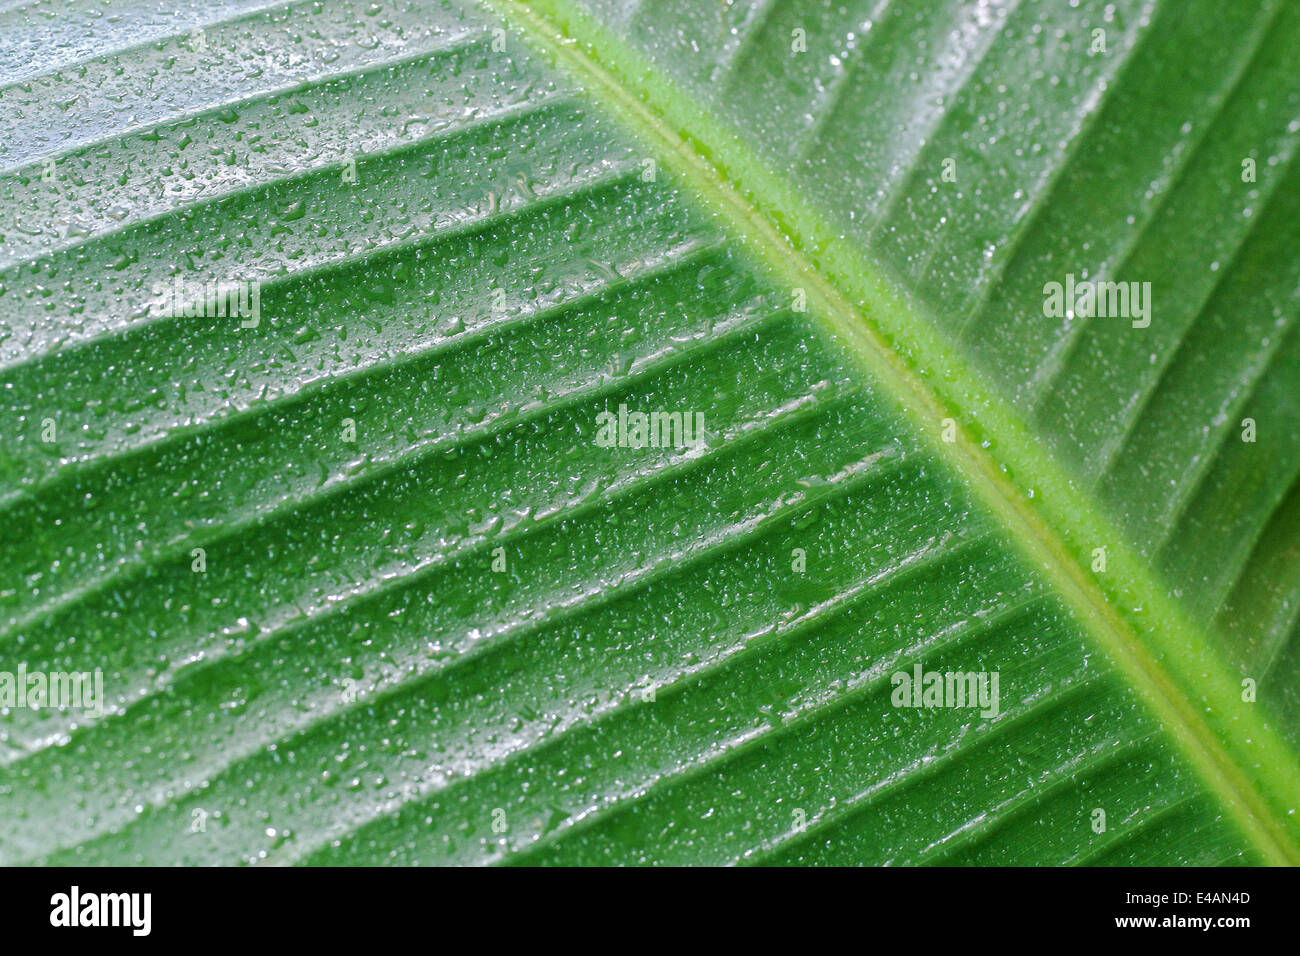 Closeup view of a banana leaf wet from rain Stock Photo